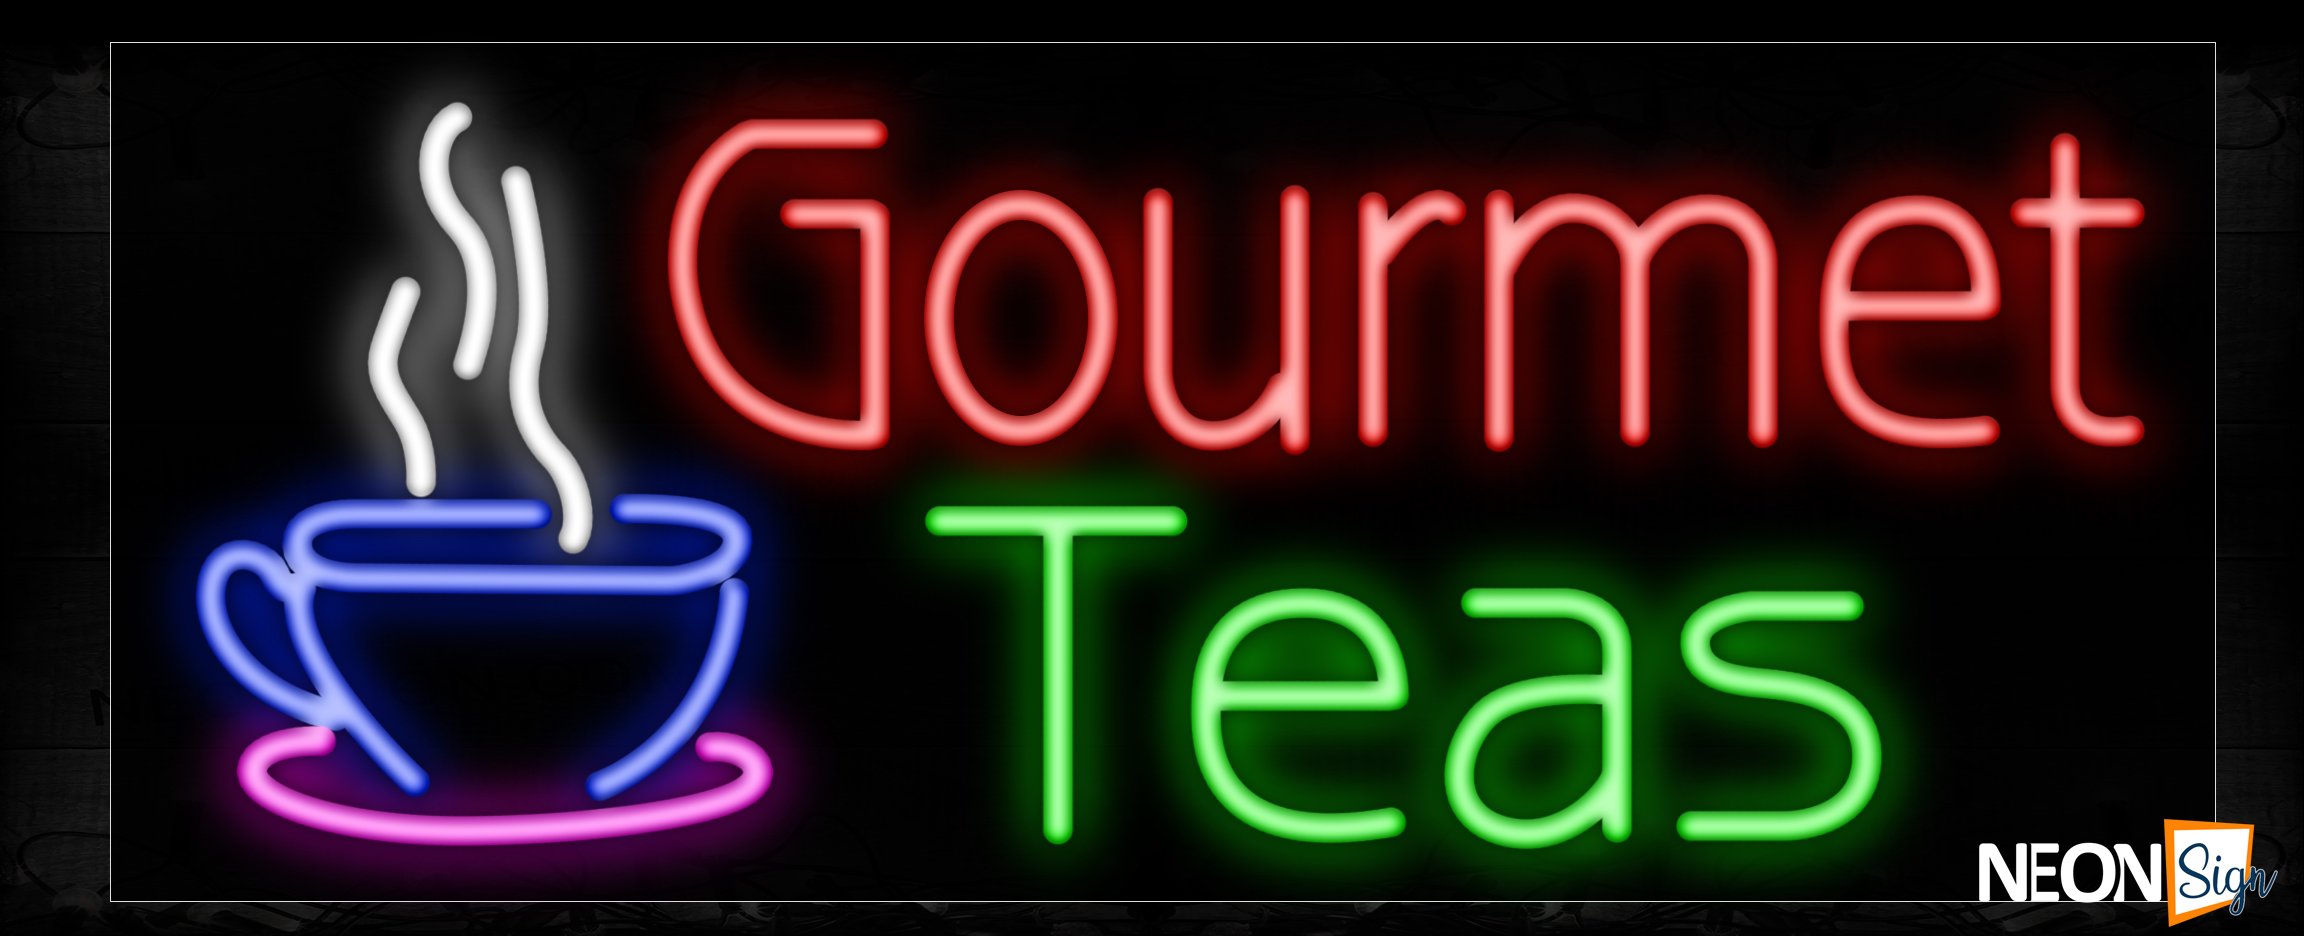 Image of 11220 Gourmet Teas with cup of coffee Neon Sign_13x32 Black Backing